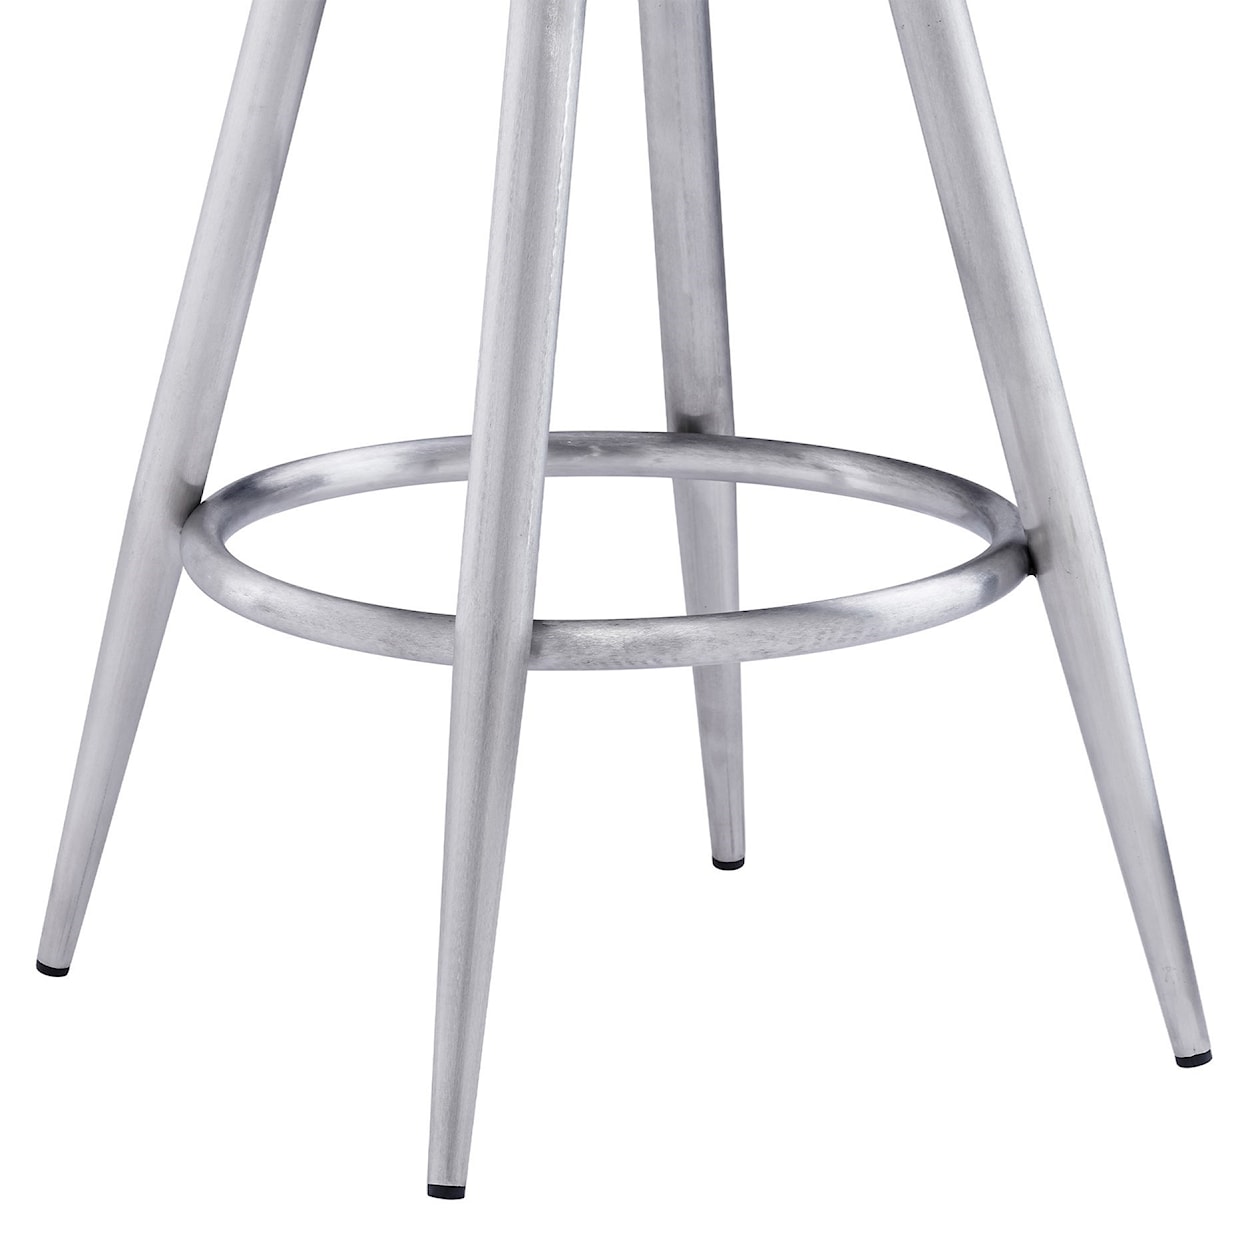 Armen Living Ruby Contemporary 26" Counter Height Barstool